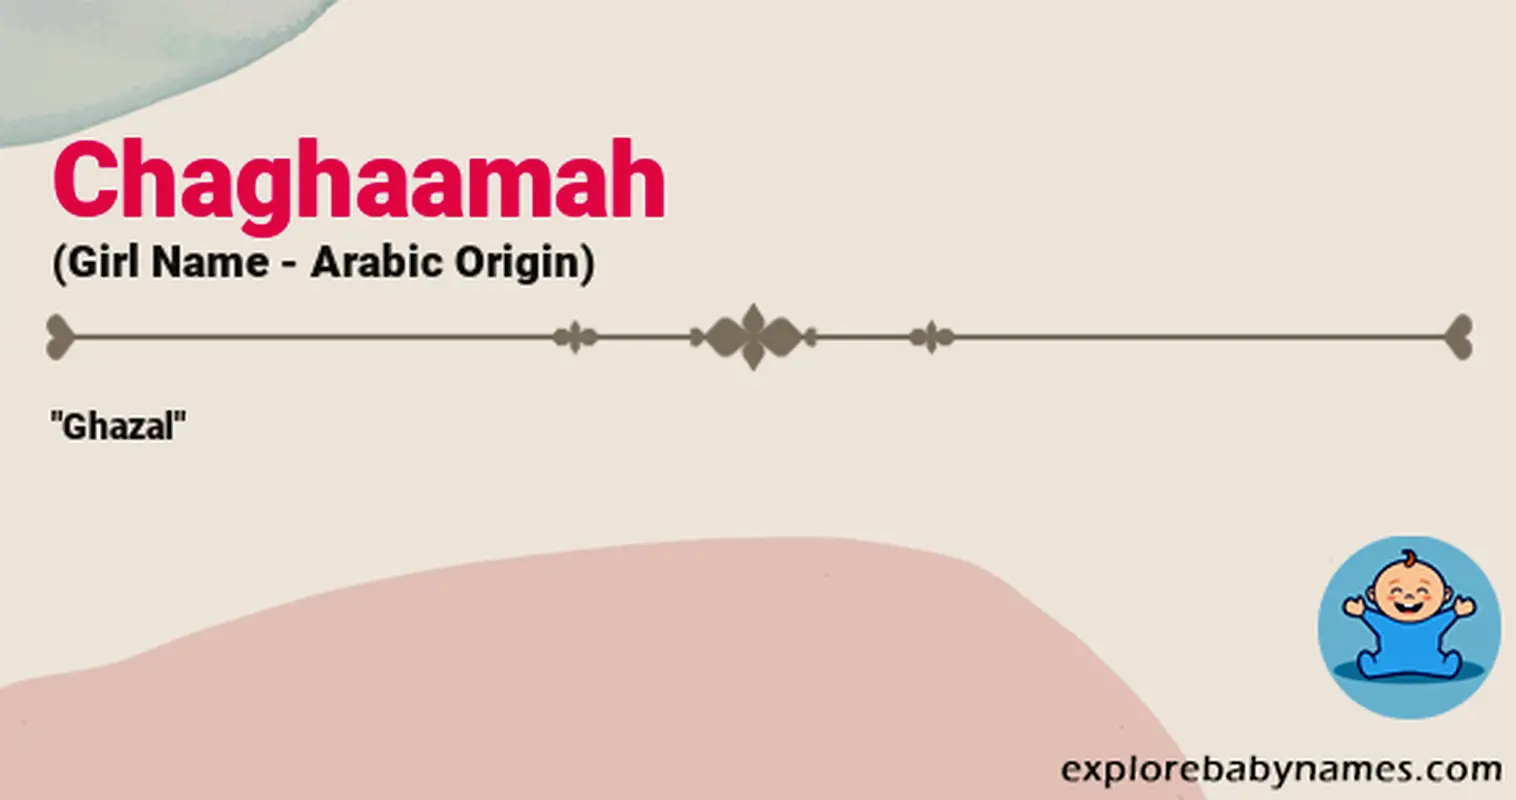 Meaning of Chaghaamah